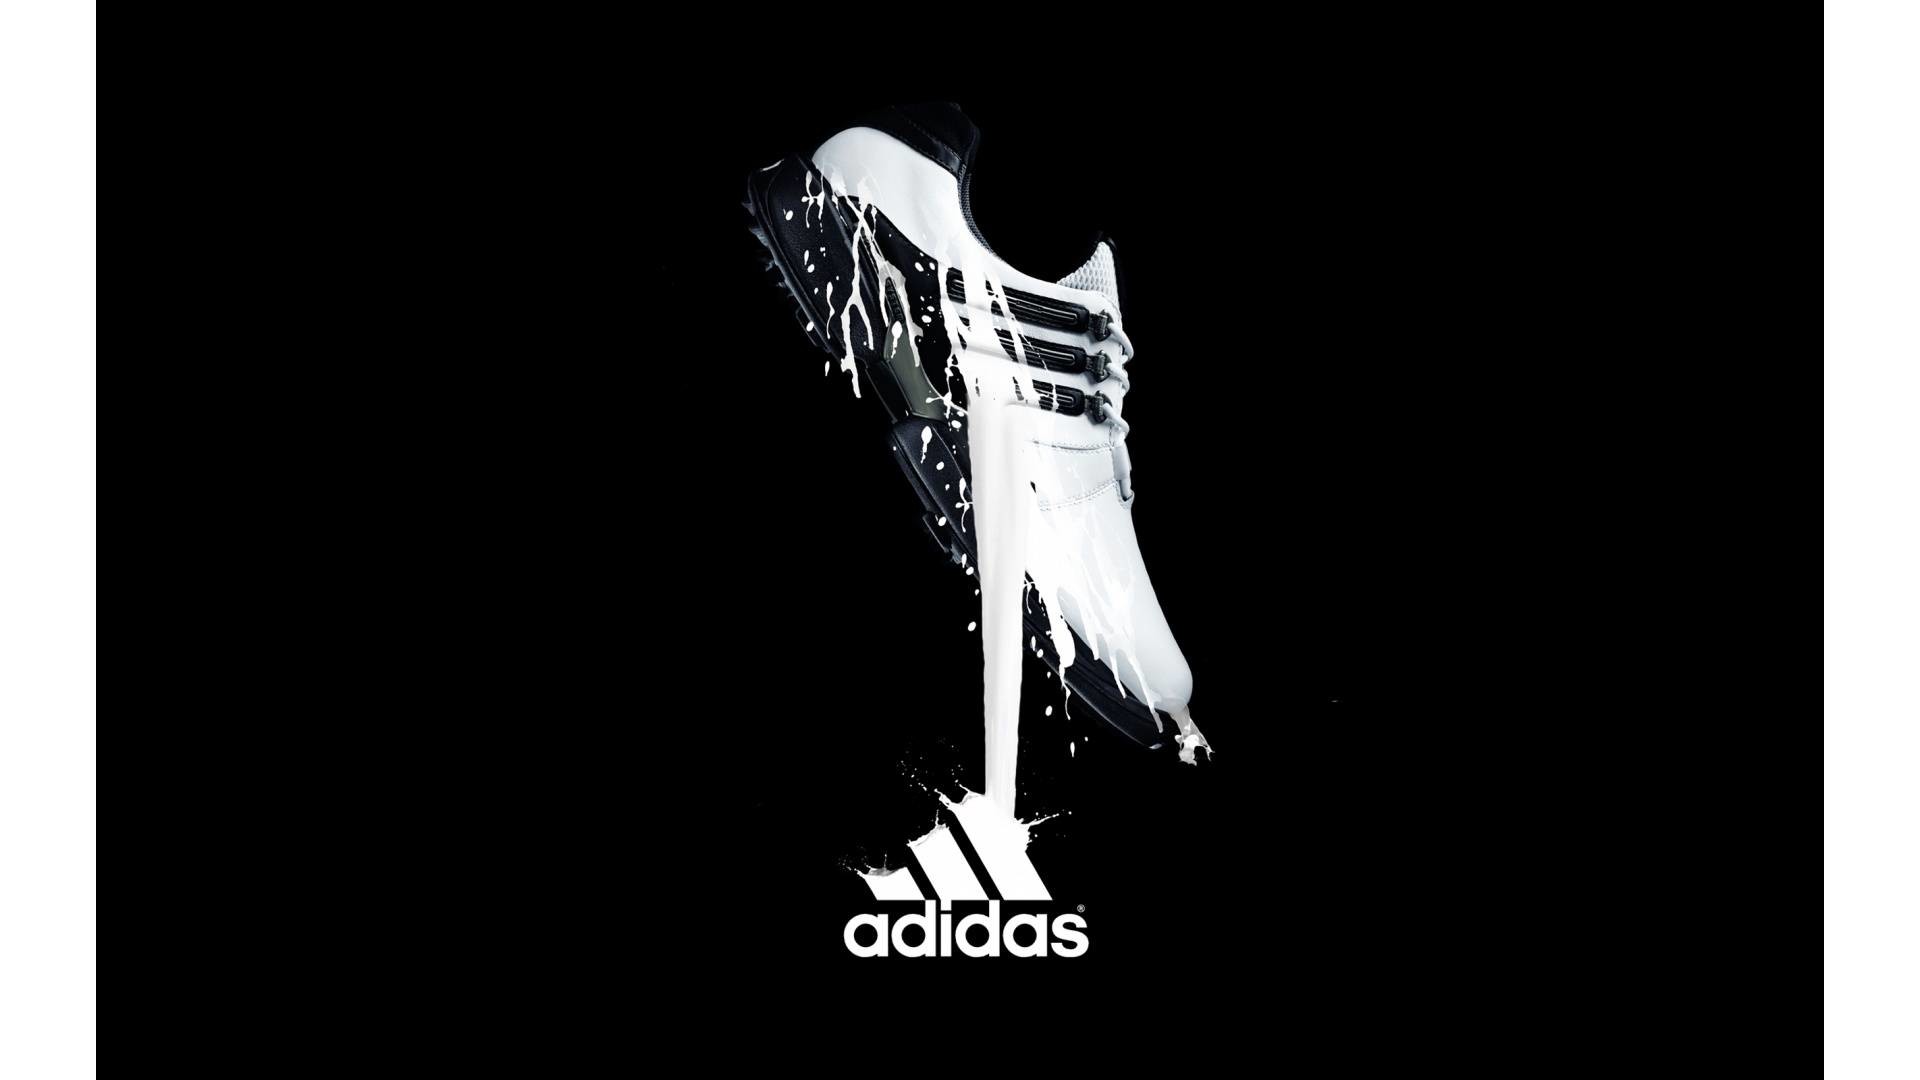 1920x1080 New HD Adidas Shoes With Logo Wallpaper